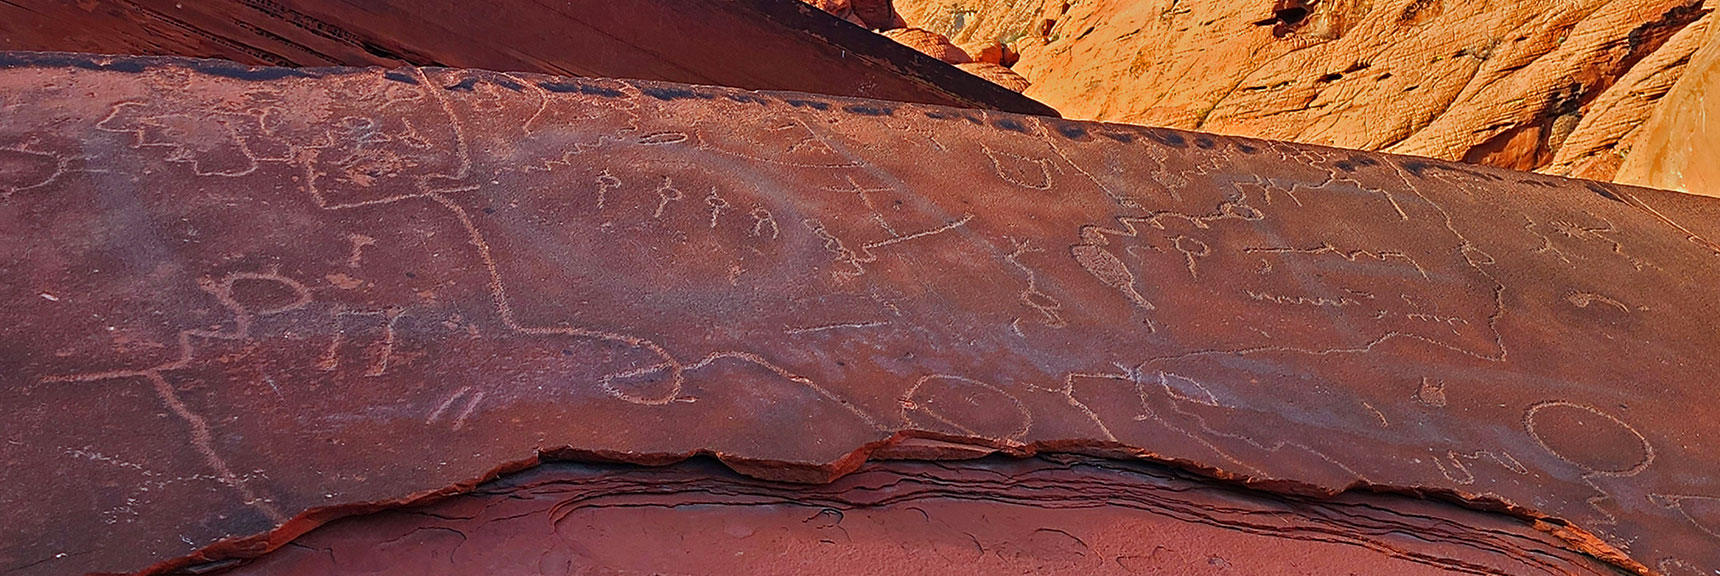 More Petroglyphs on the Lower Side of the Boulder. | Upper Calico Hills Loop | Calico Basin and Red Rock Canyon, Nevada